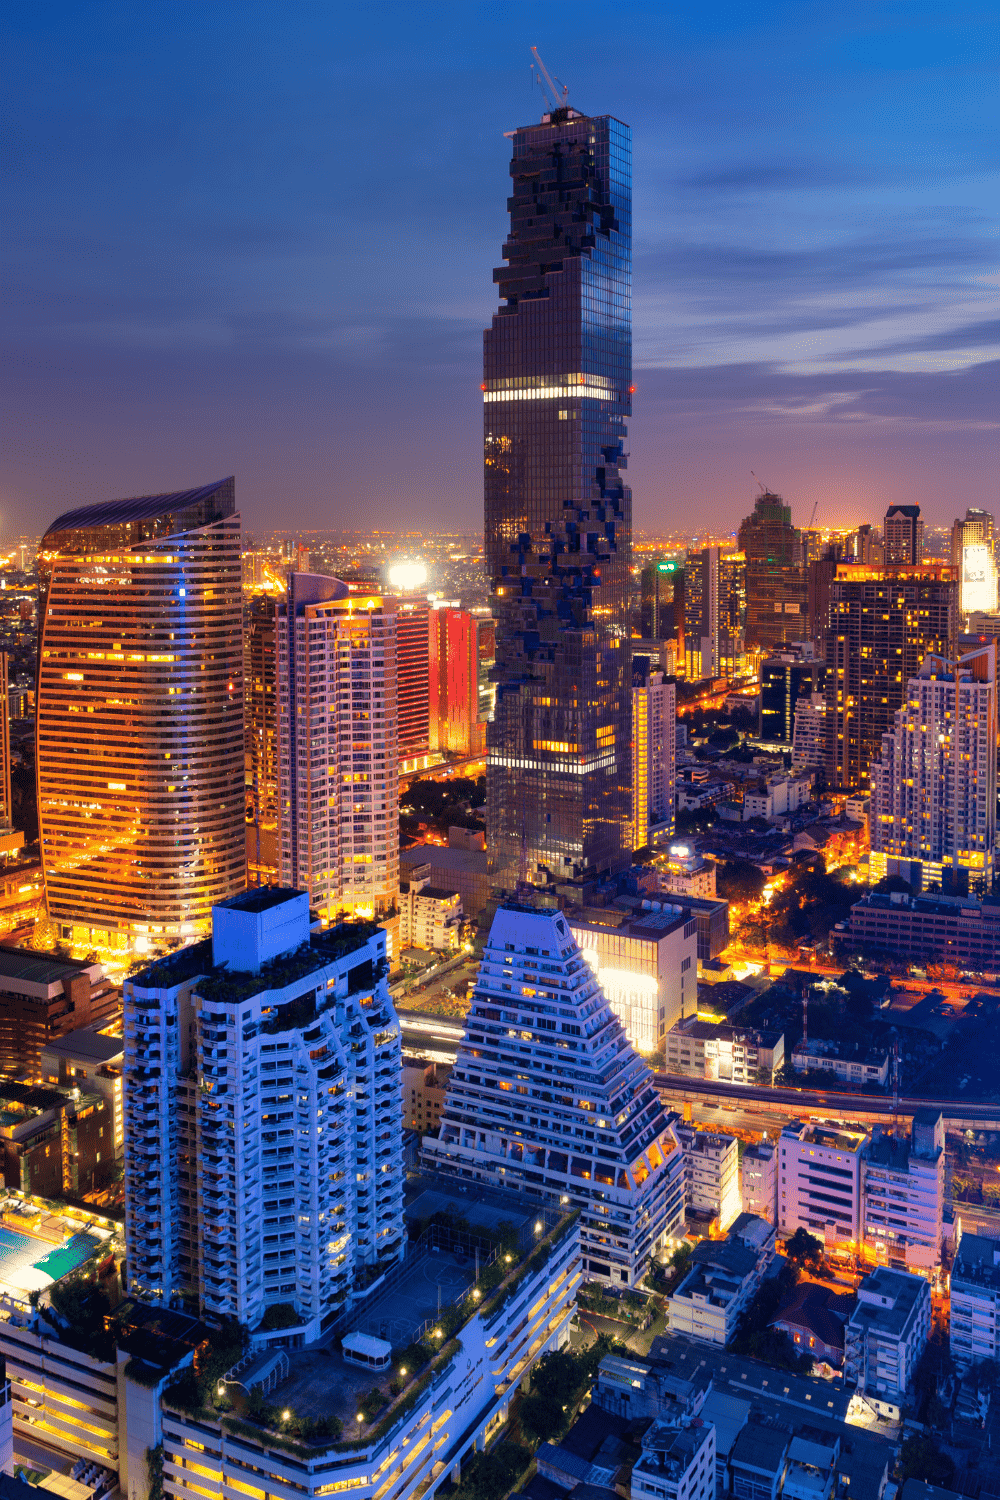 view of Bangkok by night. Looking from the sky over the city